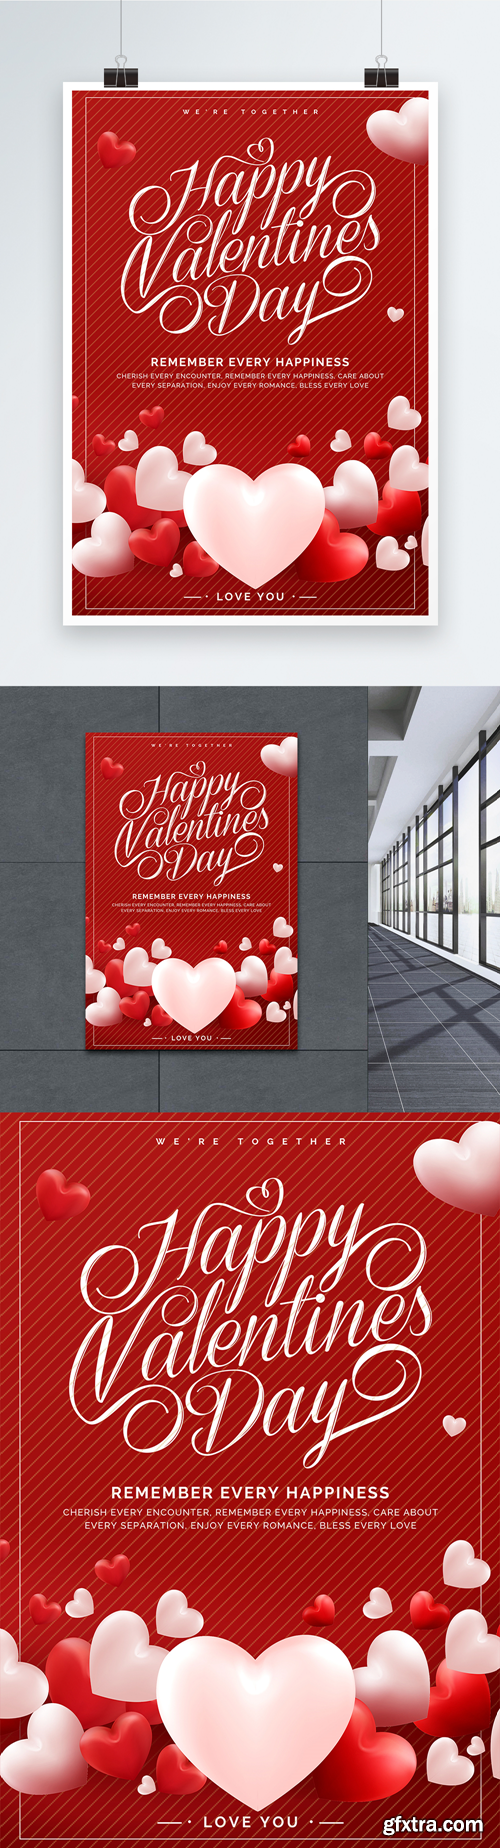 red romantic valentines day poster